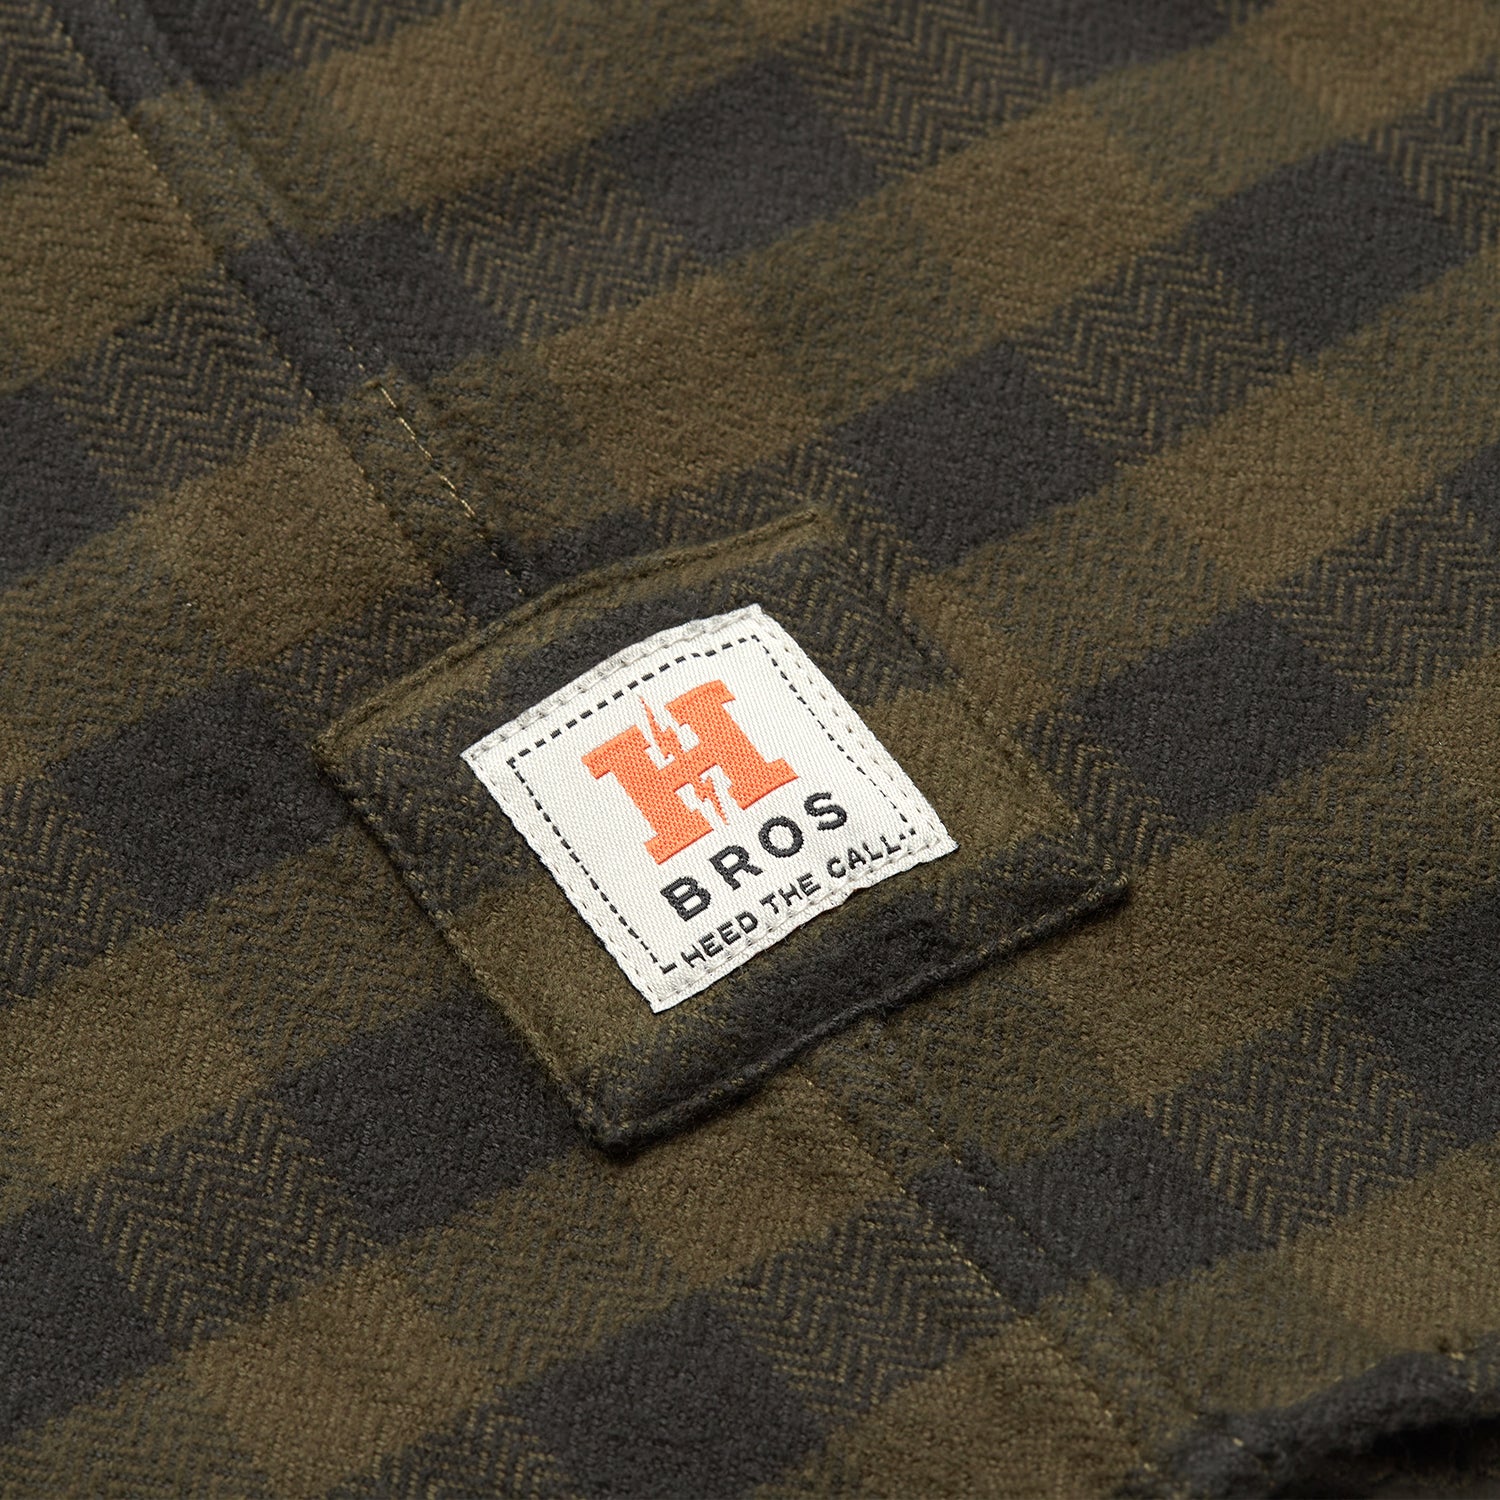 Quintana Quilted Flannel